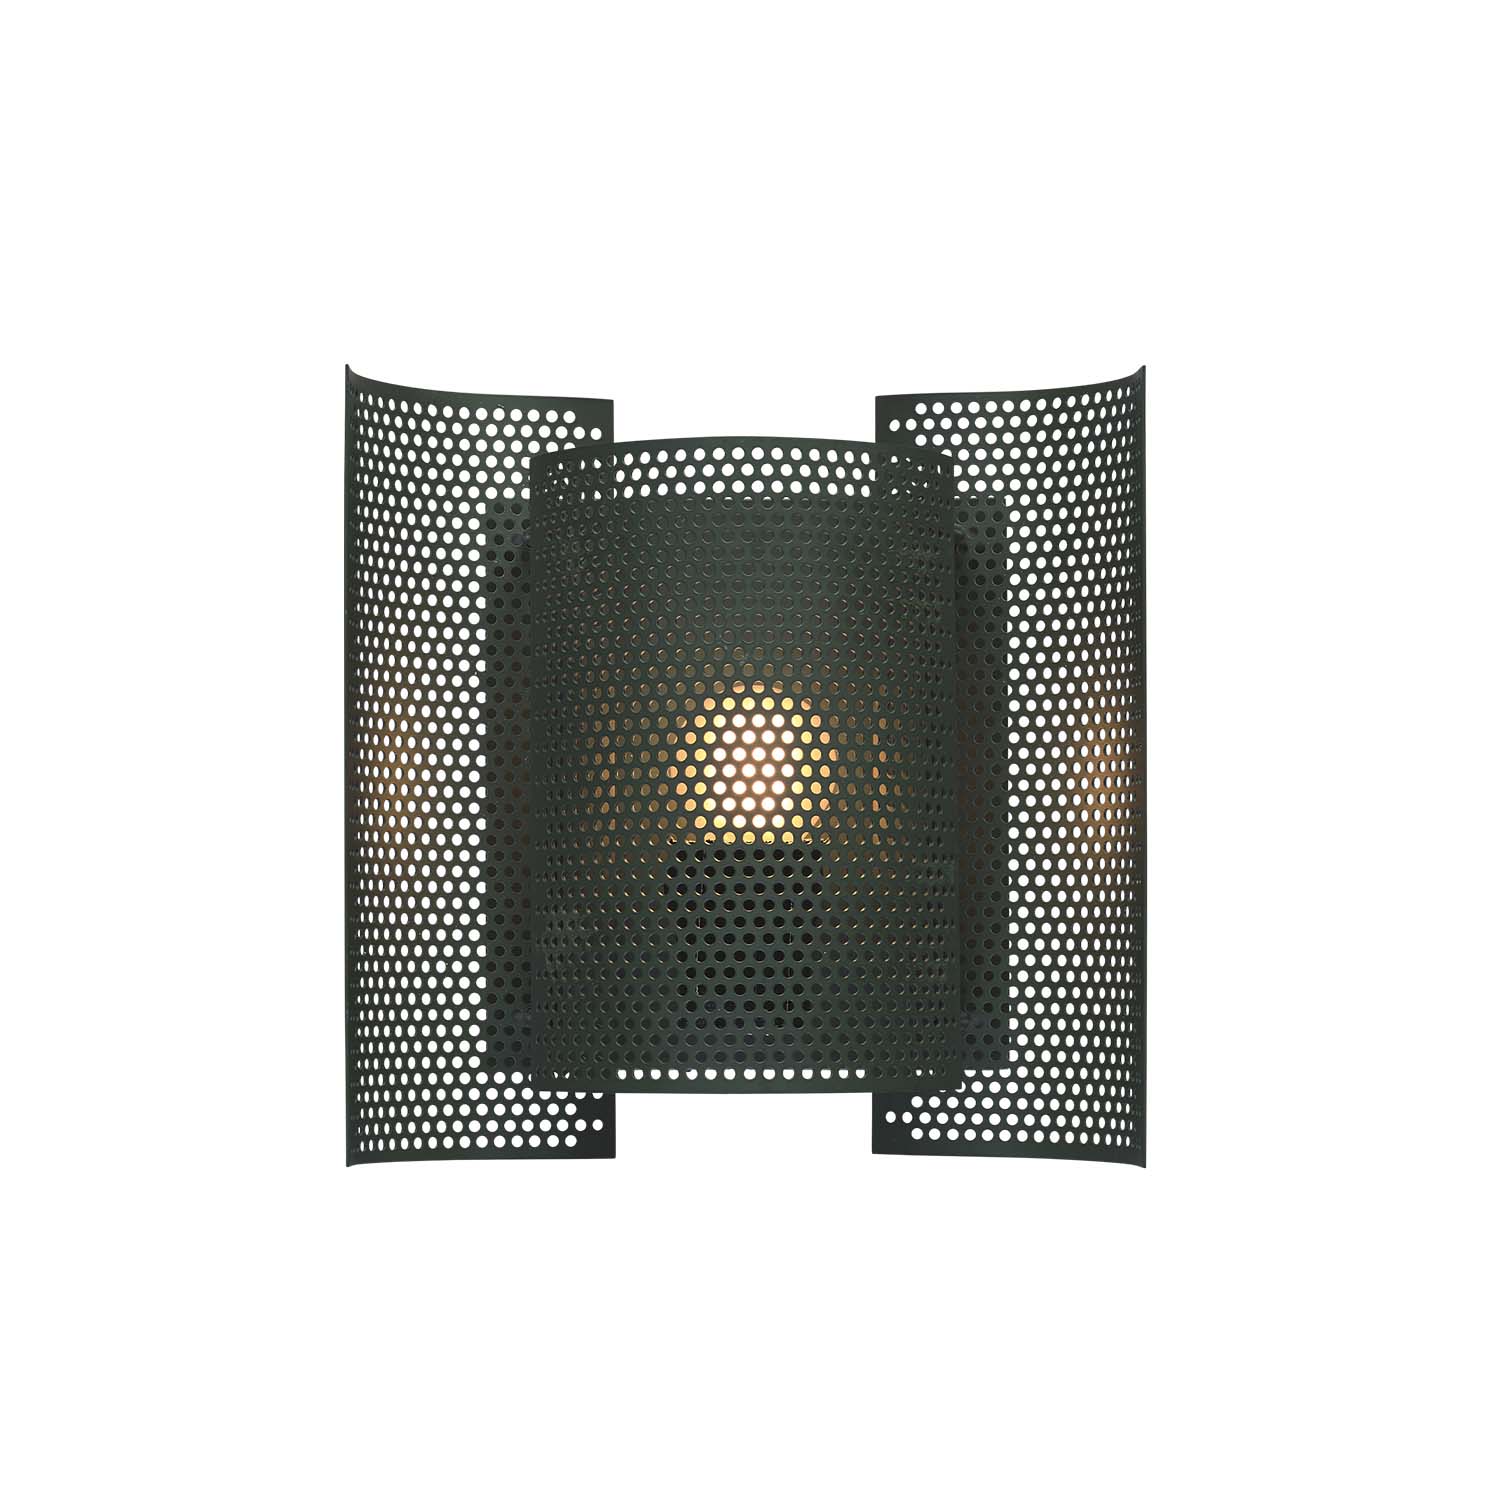 BUTTERFLY Perforated - Vintage perforated steel wall light